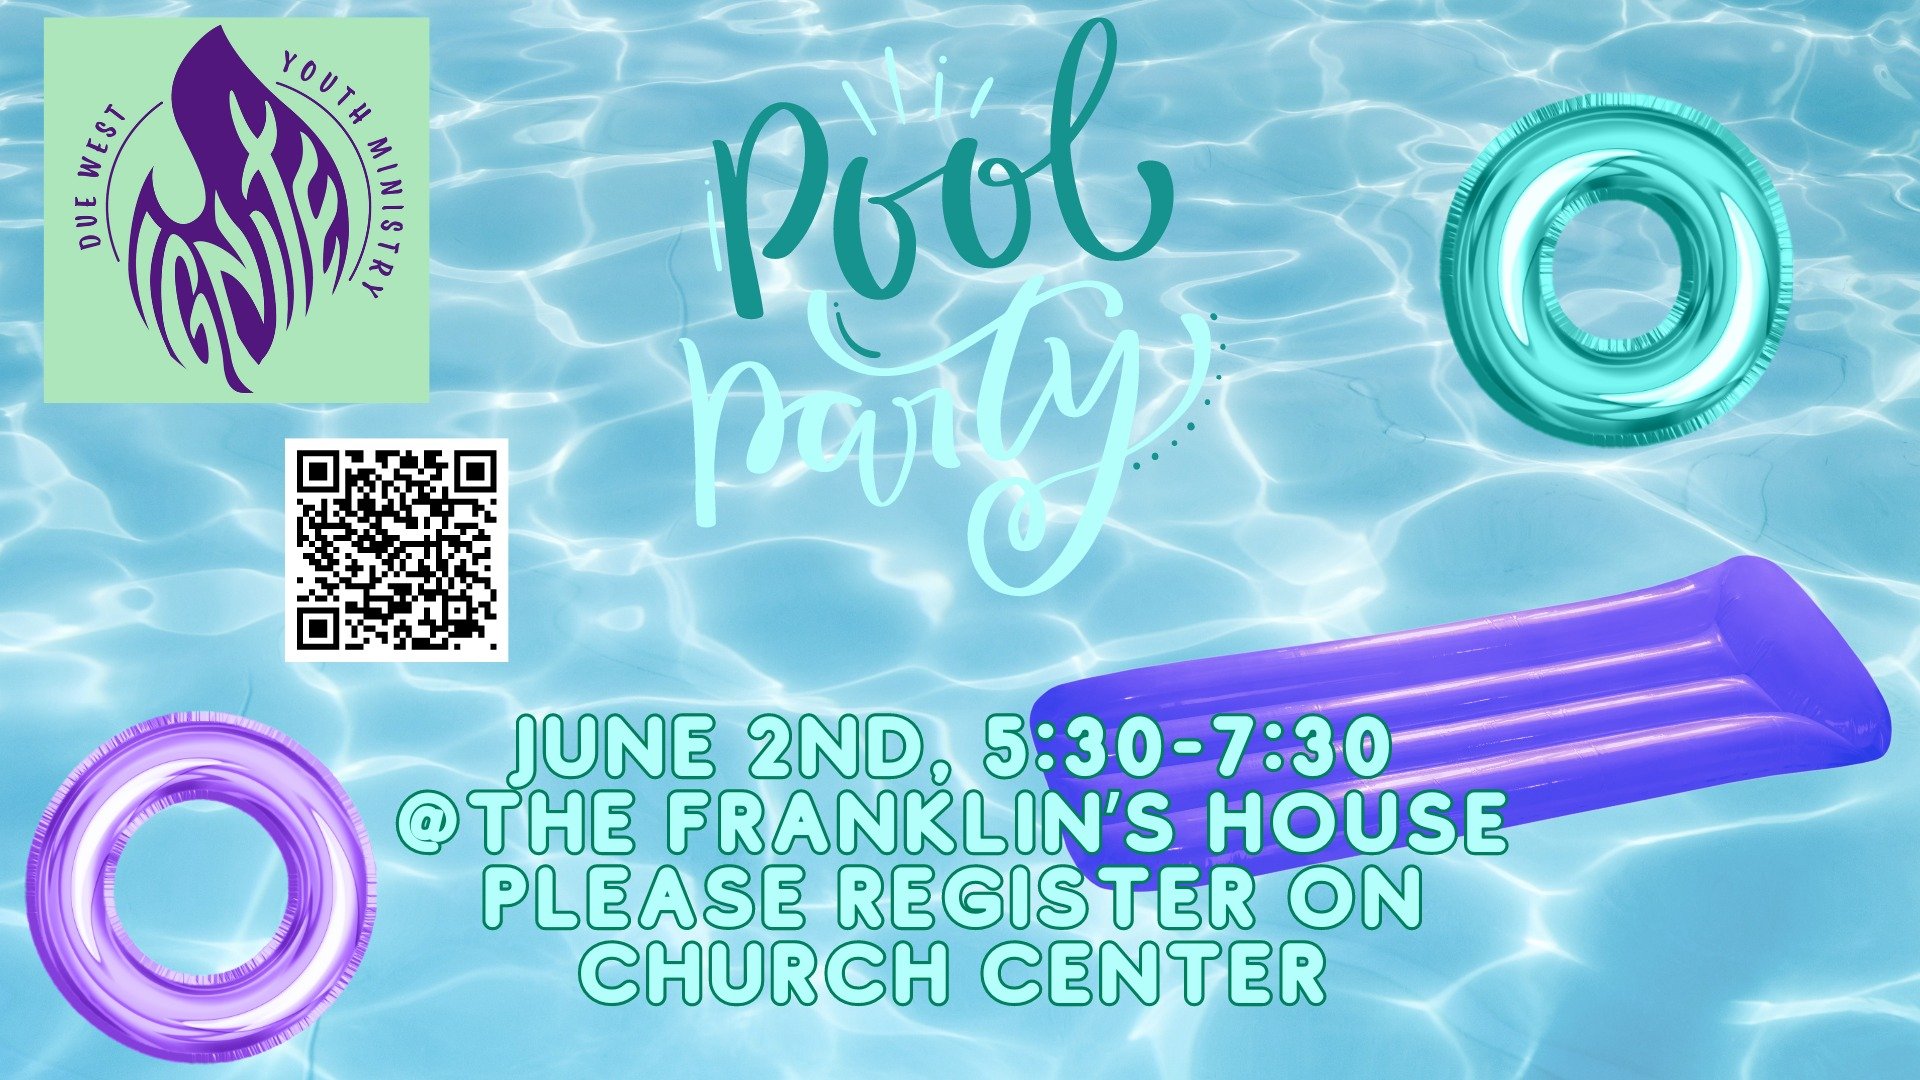 Come join us at the Franklin's home for an Ignite Pool Party!
We will eat together, swim, and fellowship! Parents are welcome to stay for dinner and visit with other parents! This is for all Ignite youth including rising 5th graders!
Registration wil